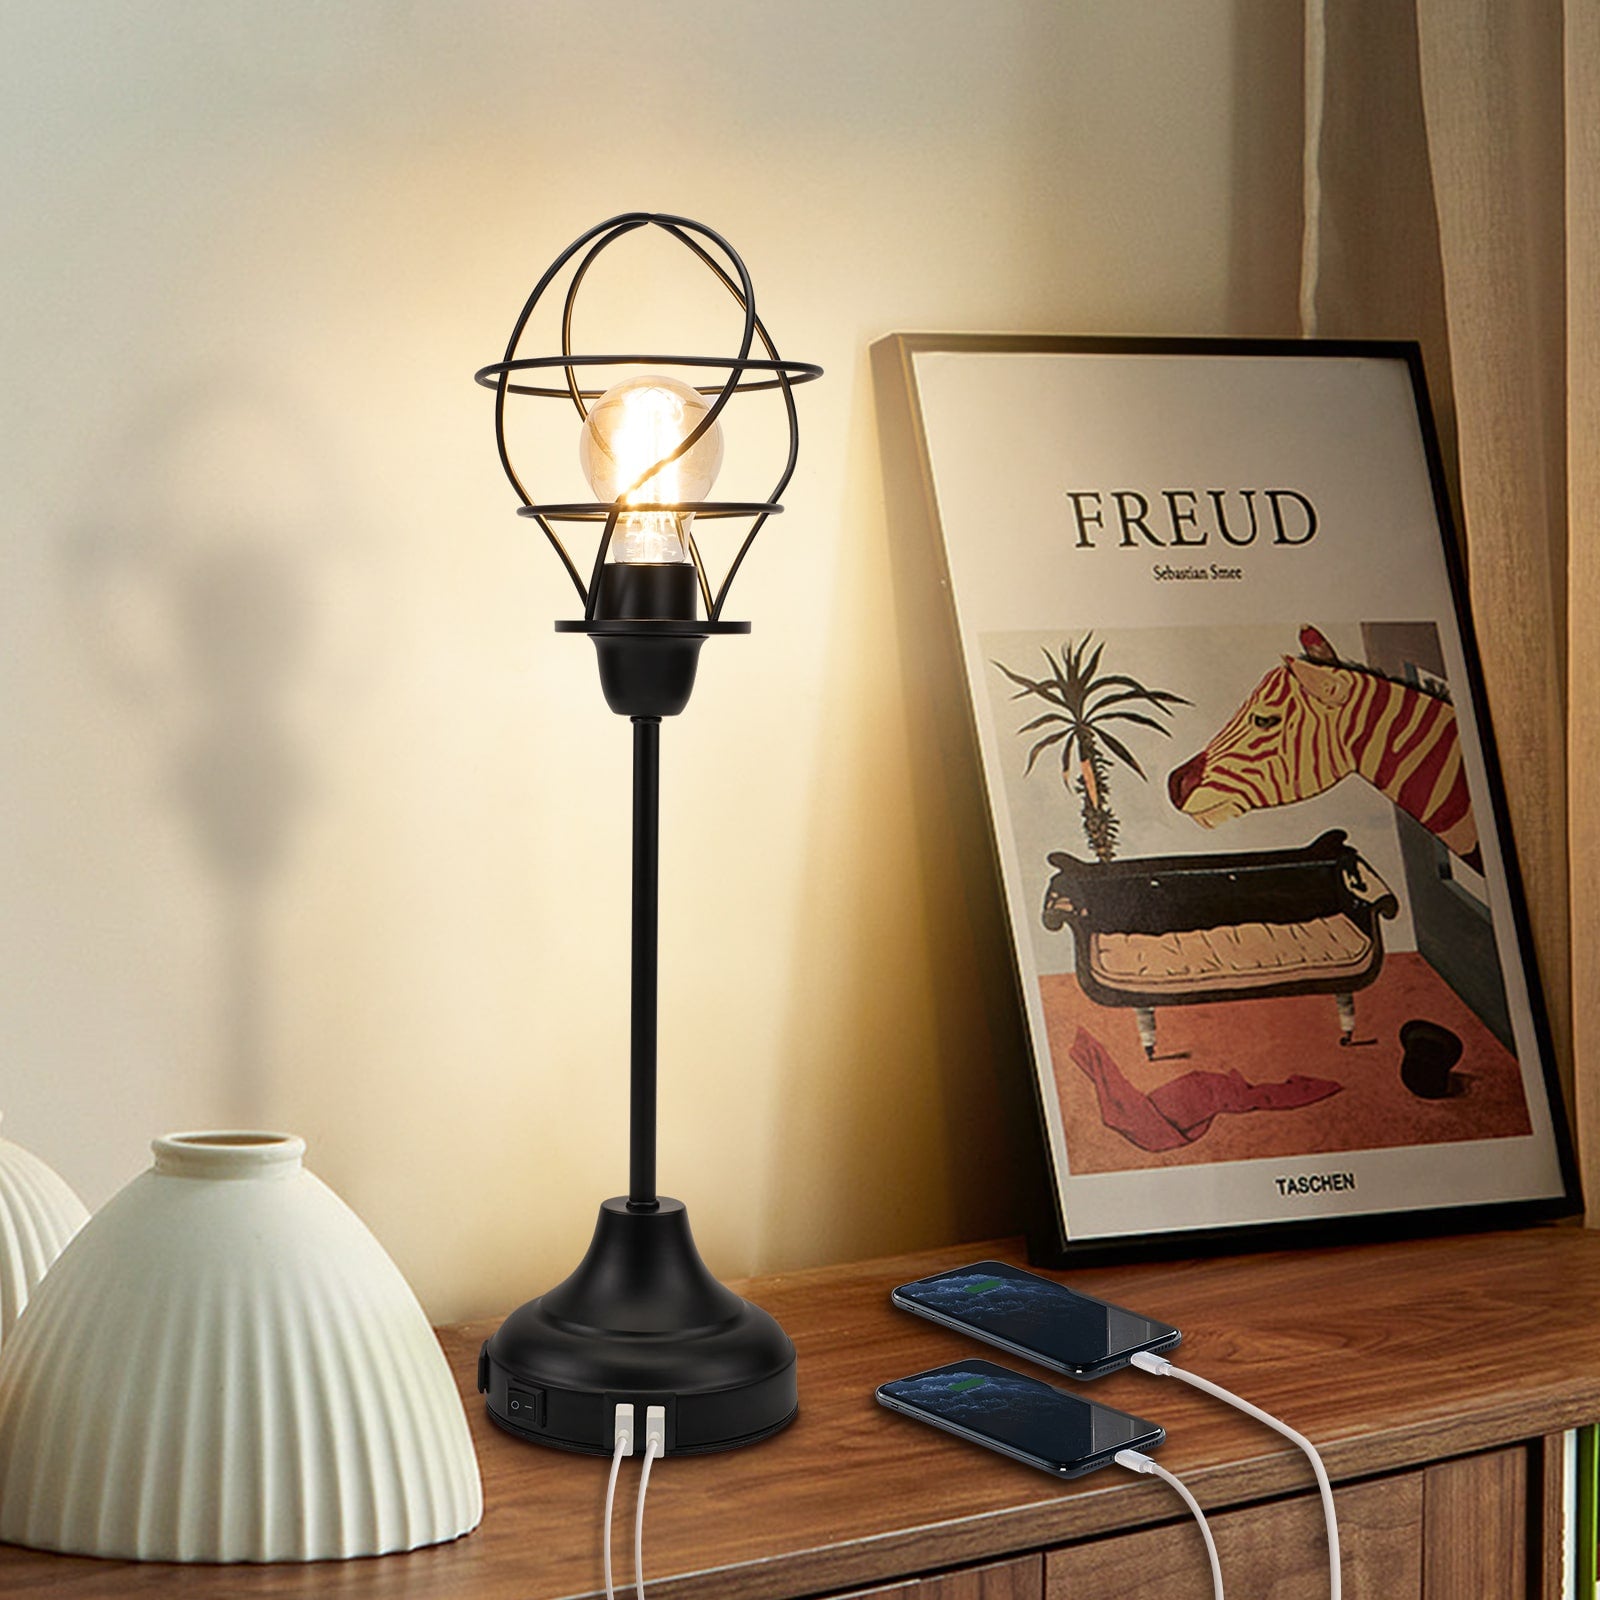 Retro Style Table Lamp Desk Light with Torch Cage Shade Dual USB Ports